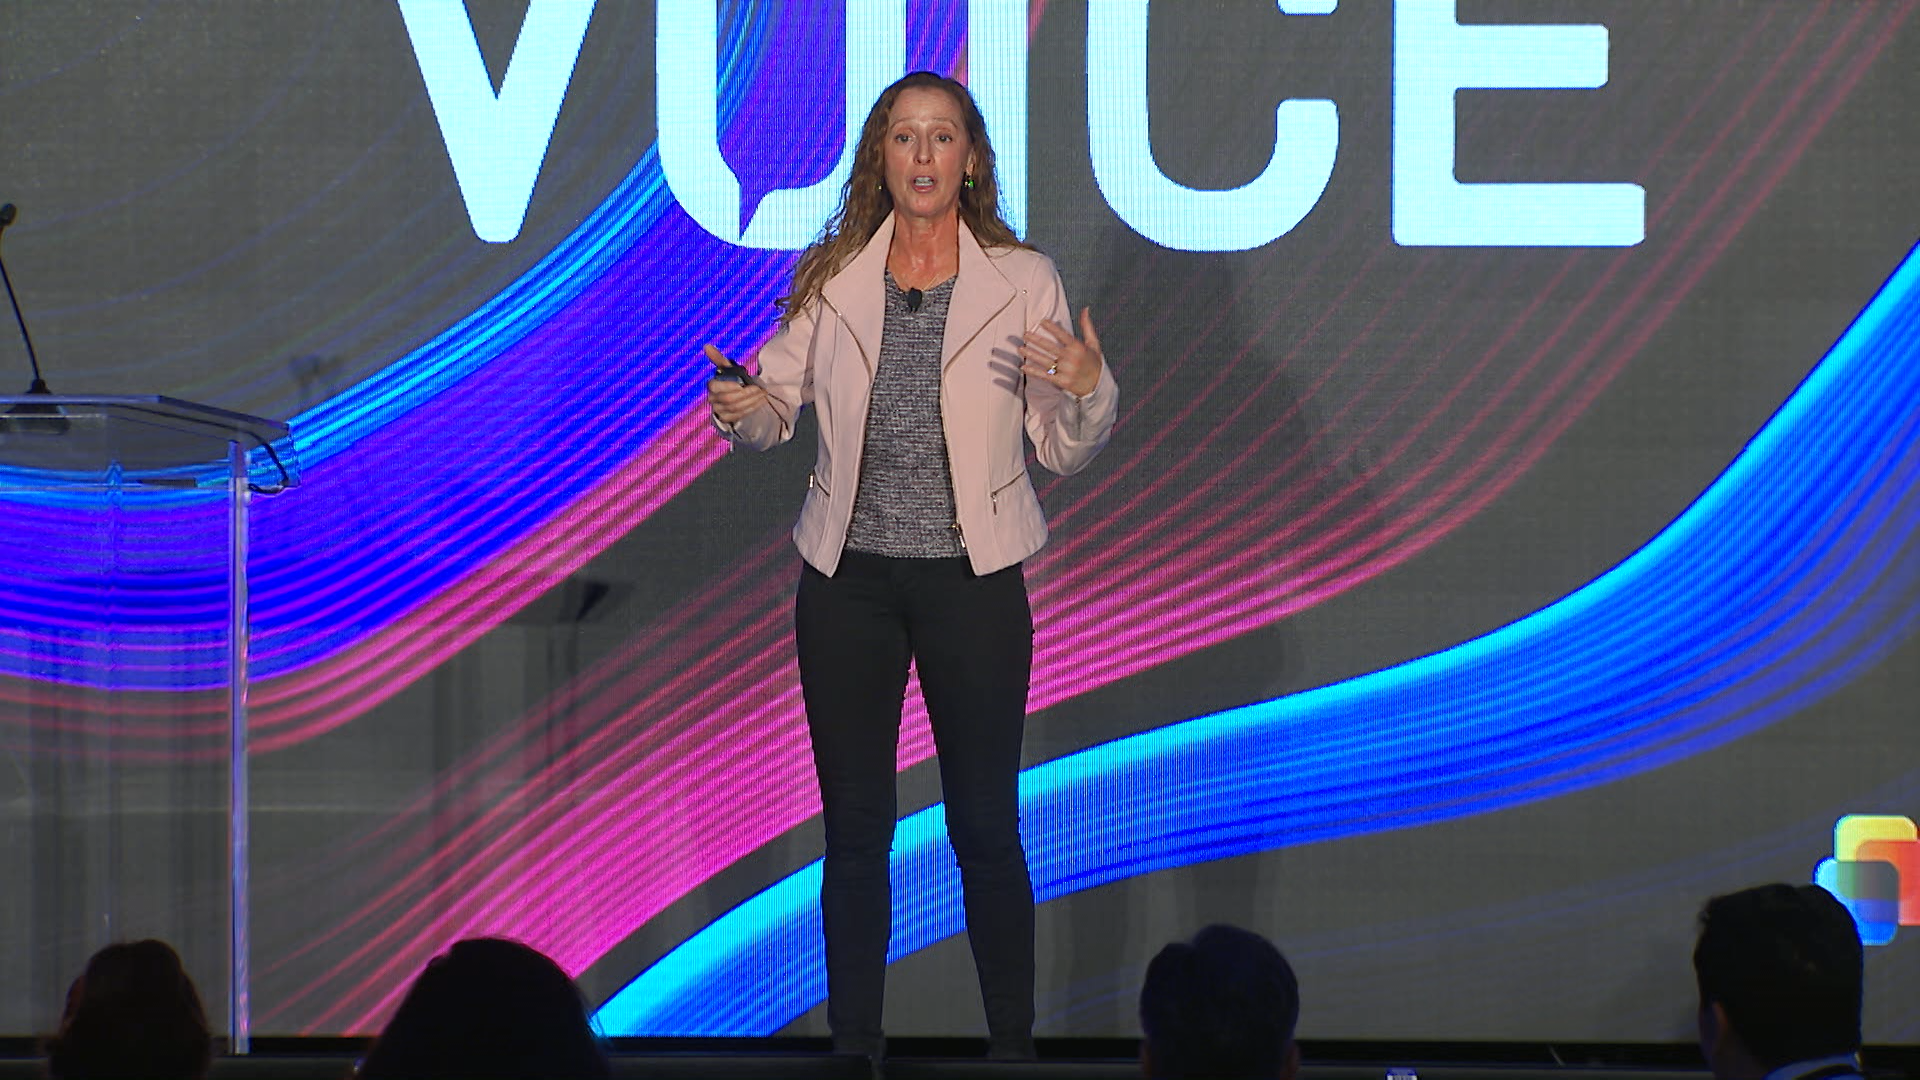 VOICE22 | The Experience Economy as a Driver for the Total Experience | Carolyn Laffan Miller